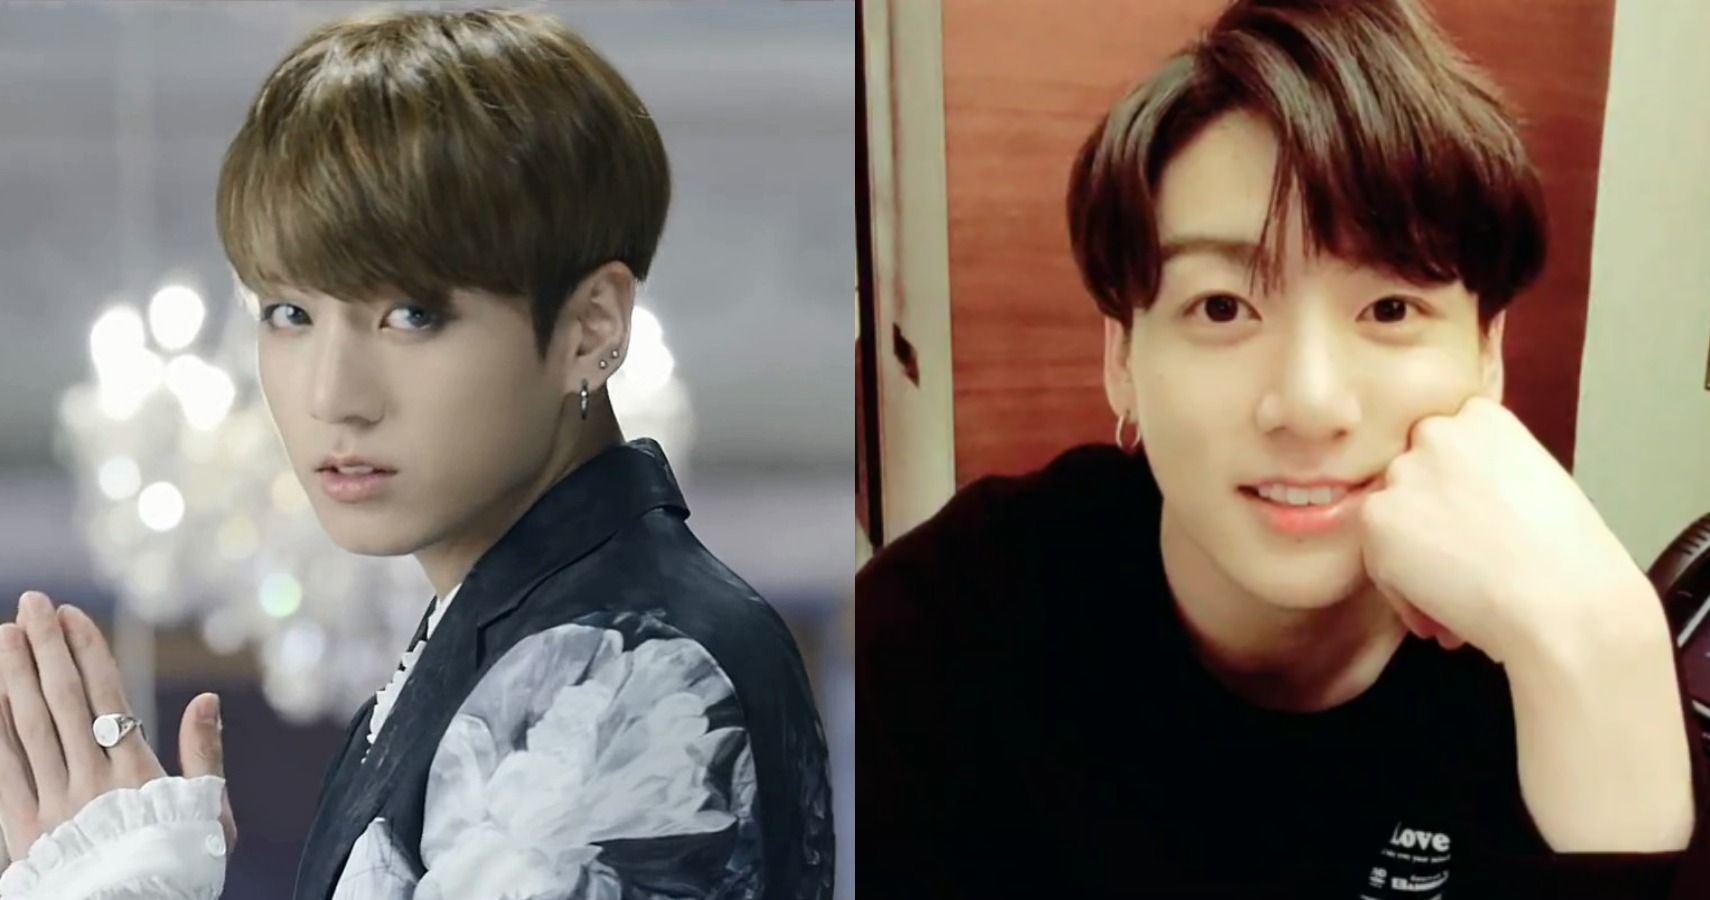 Bts 10 Things You Need To Know About The Golden Maknae Jungkook